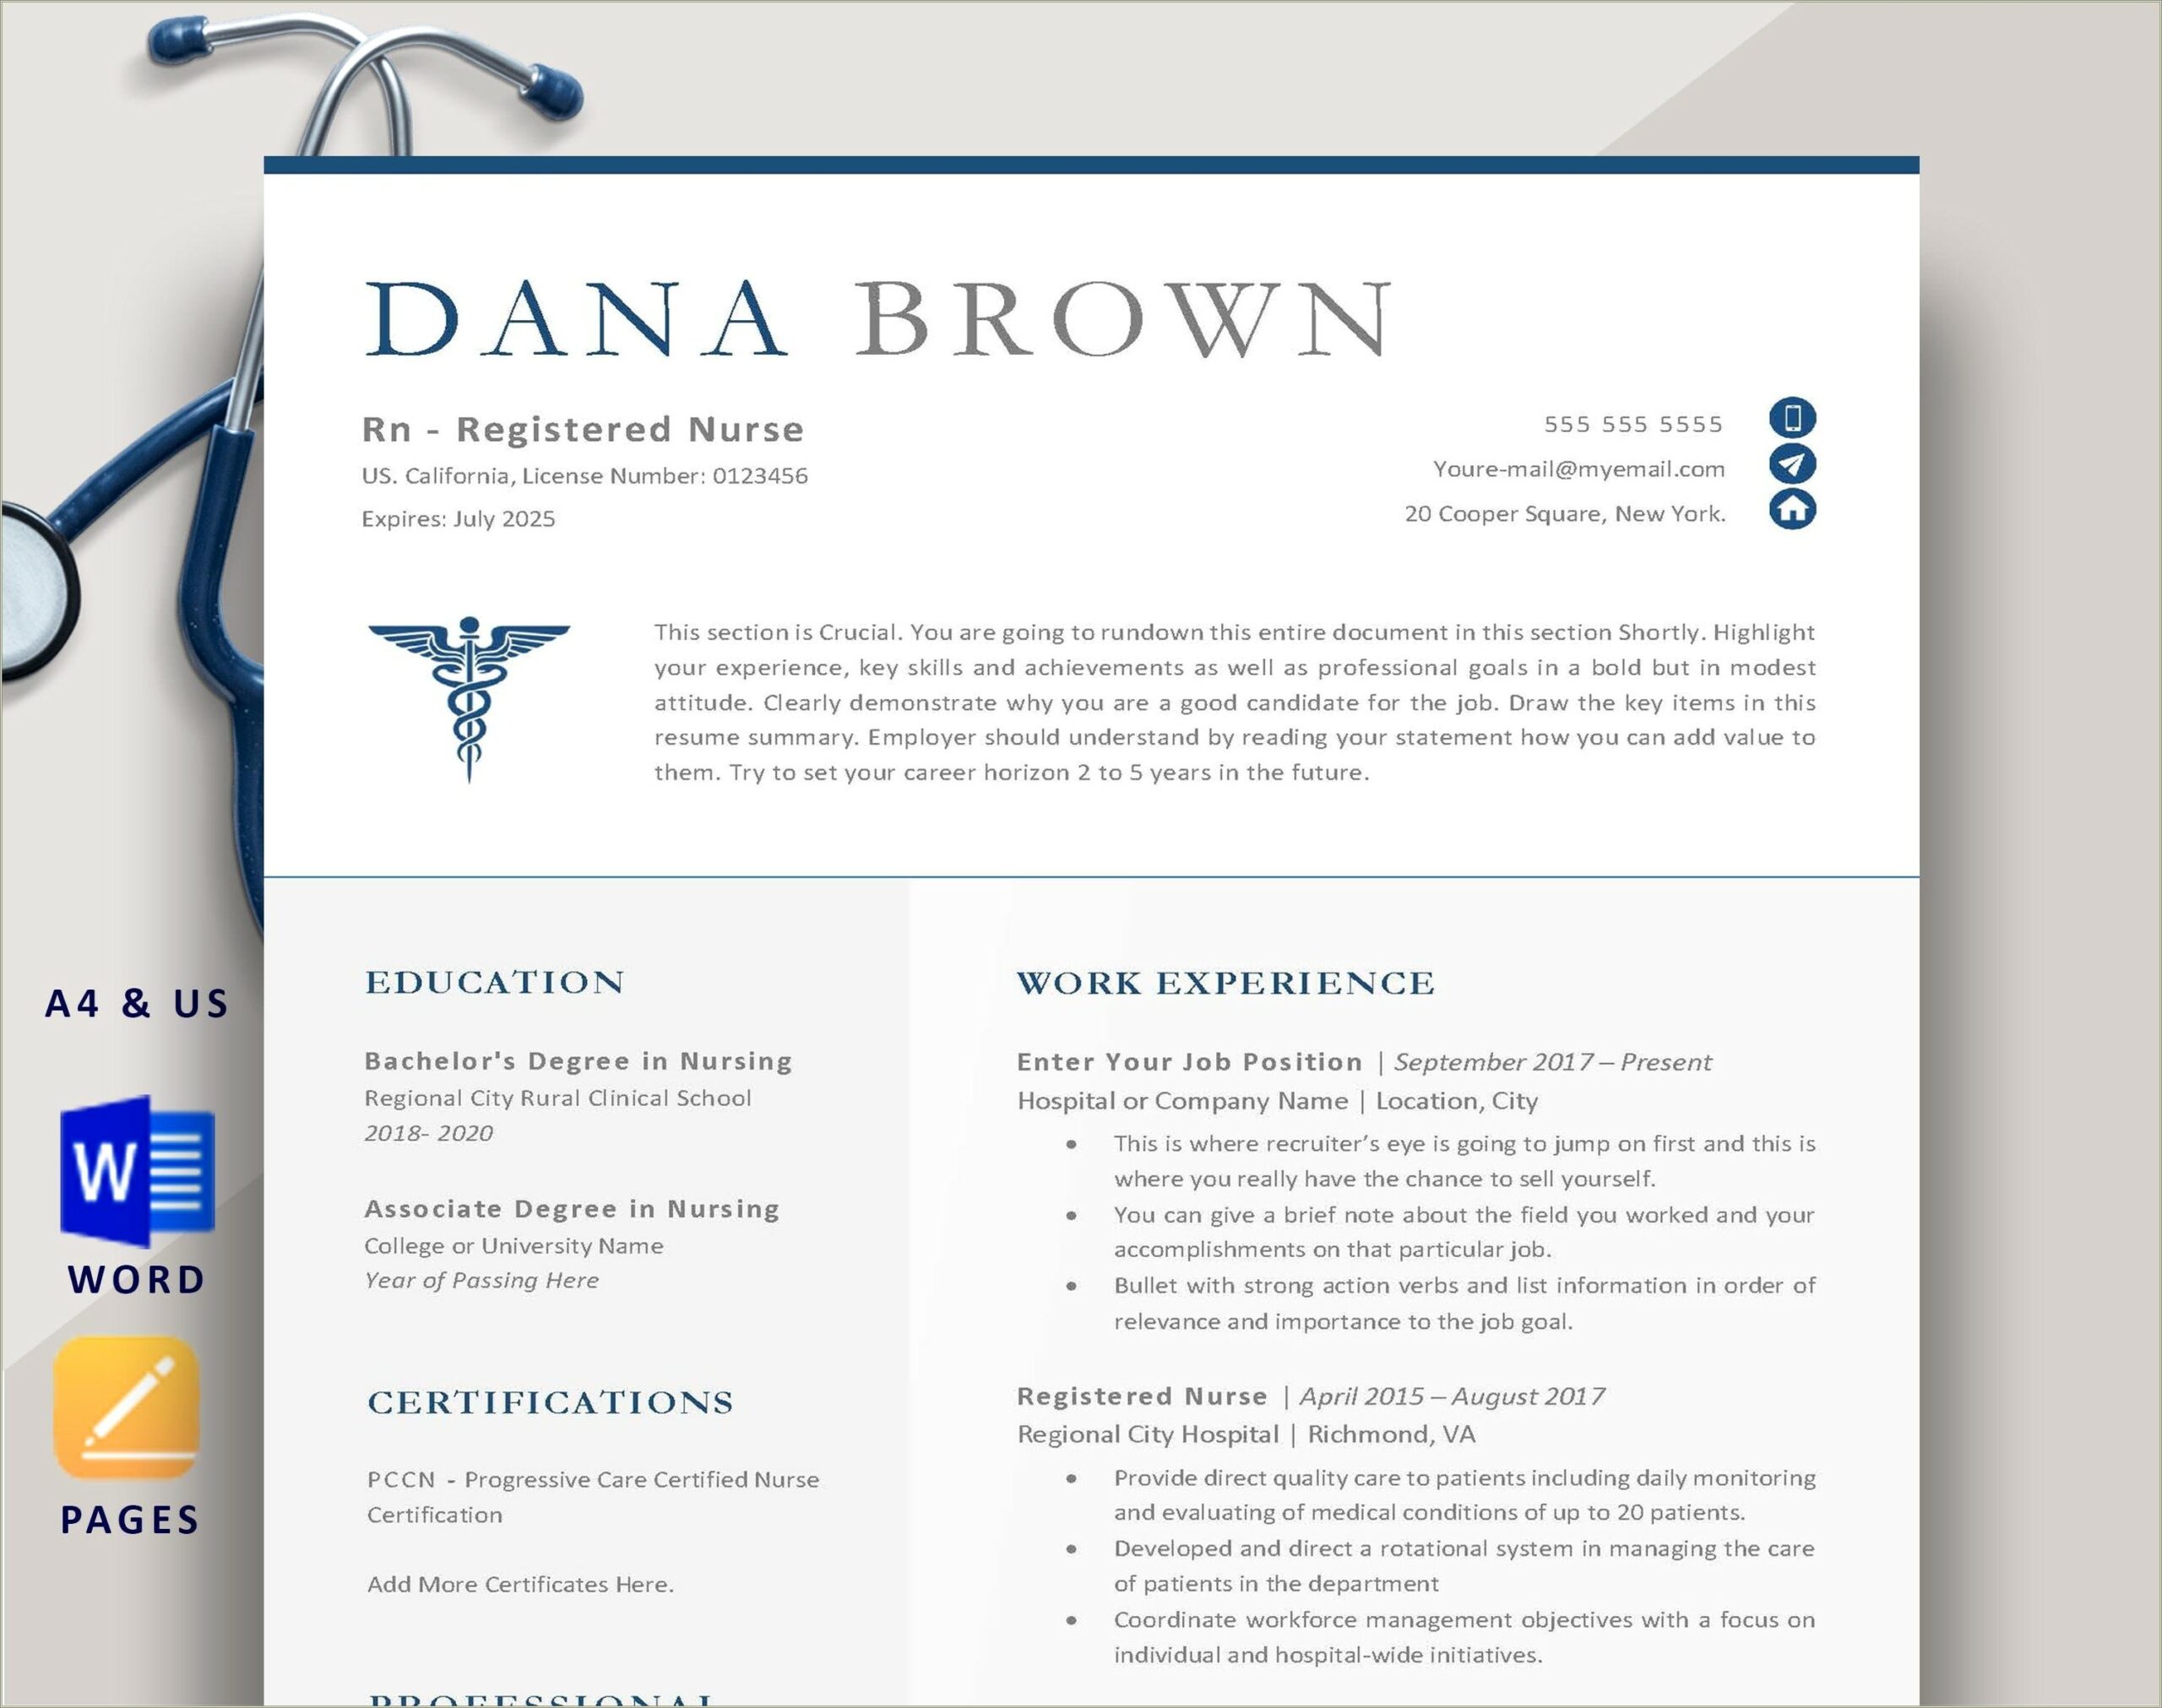 Nurse Practitioner Resume Example With Summary